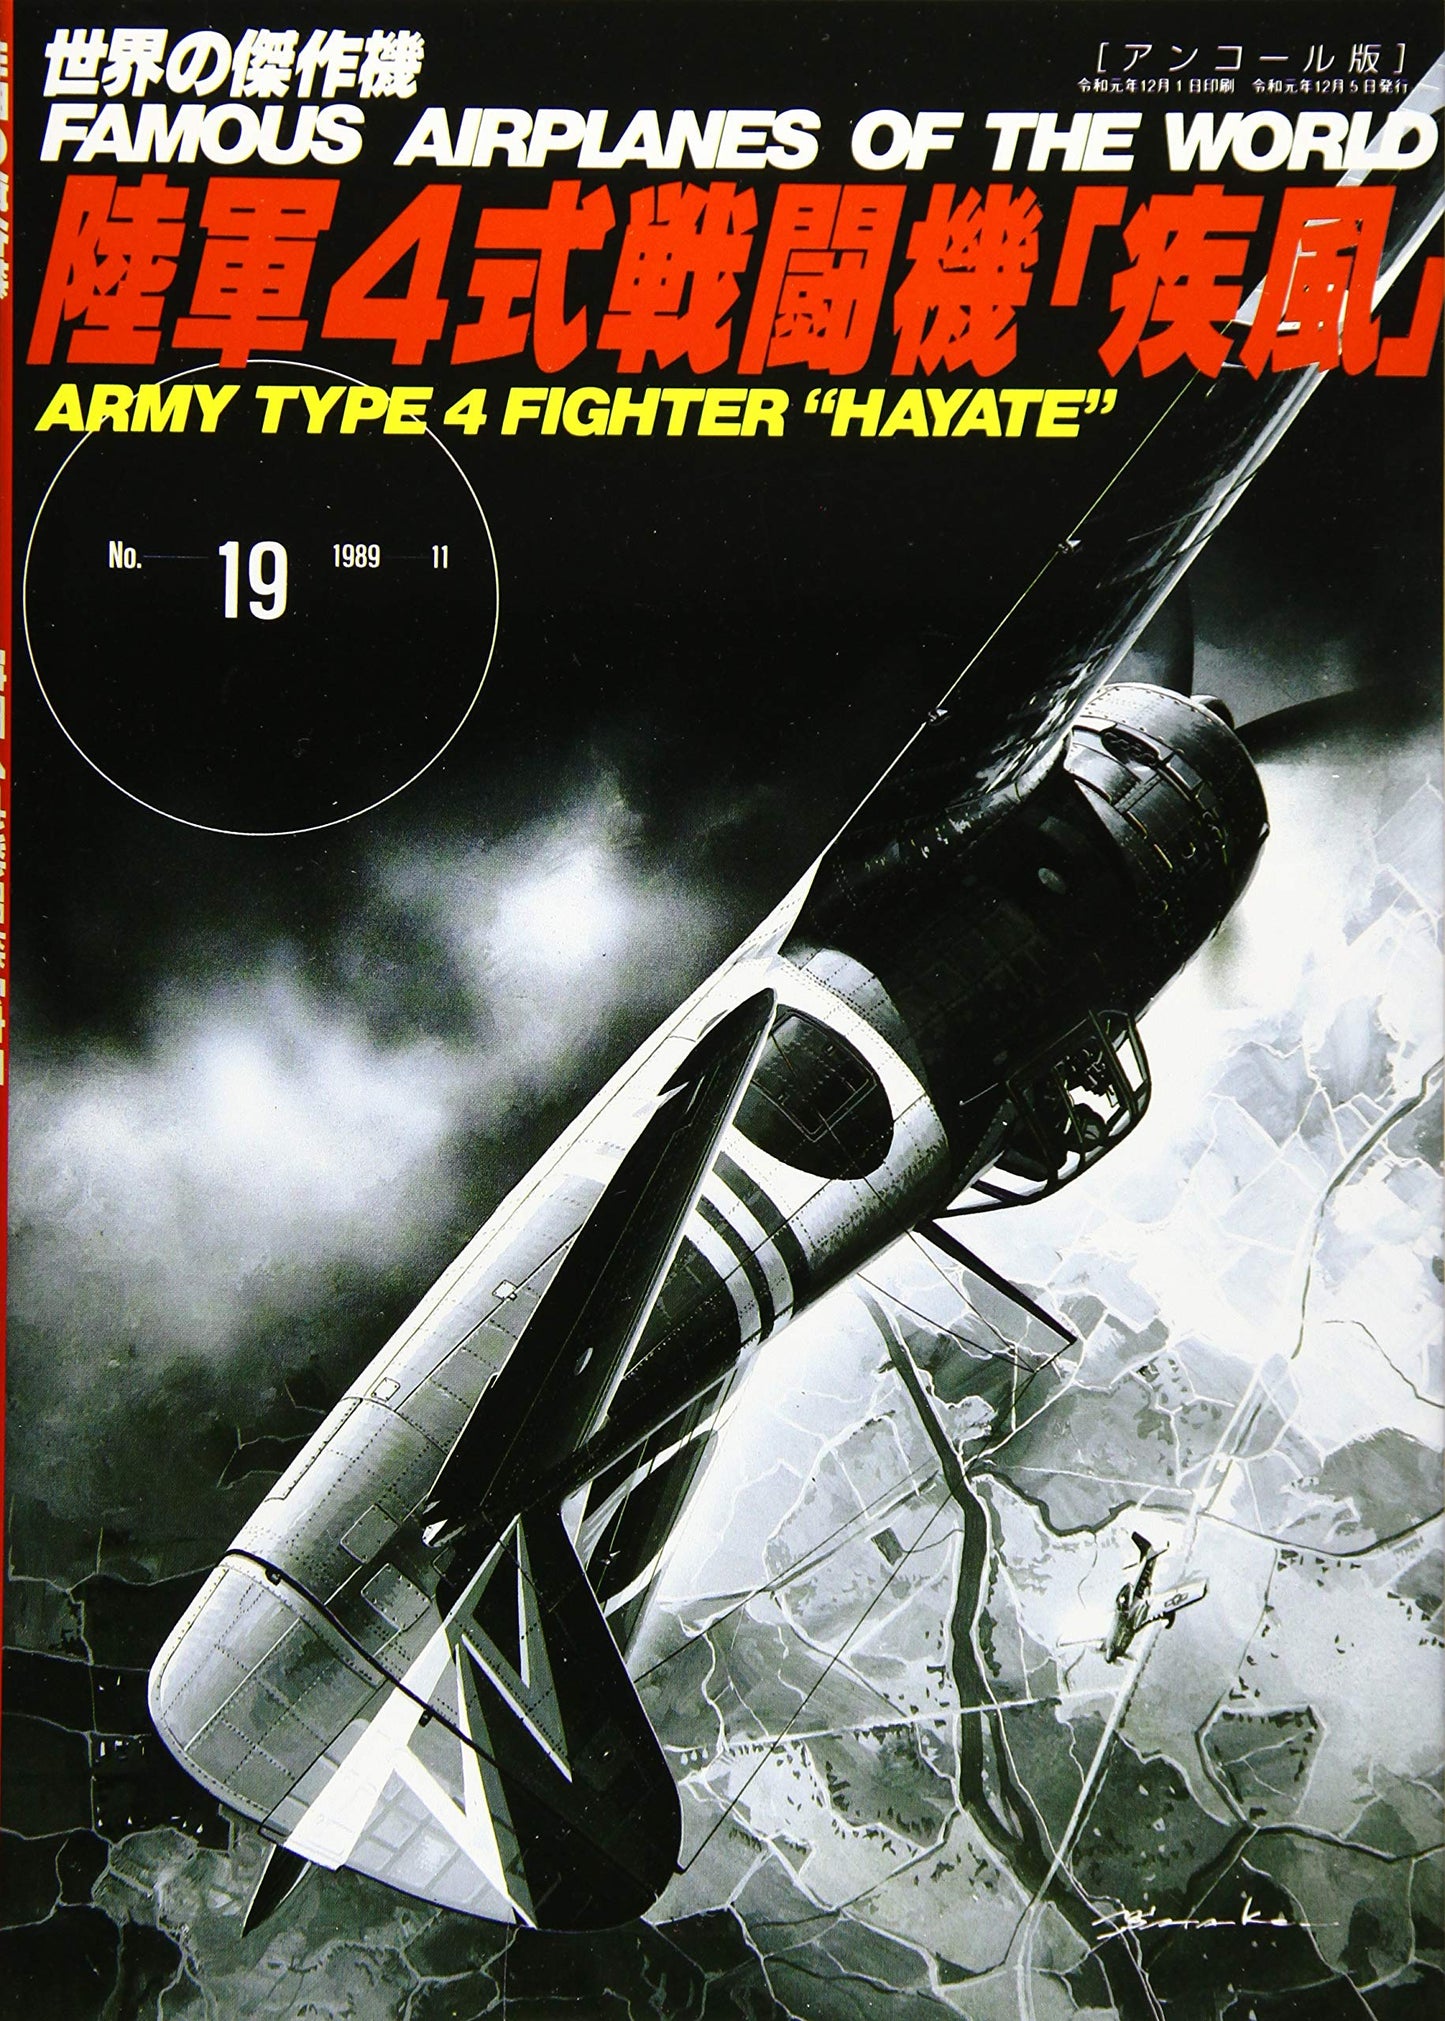 Army Type1 Fighter HAYATE / Famous Airplanes of The World No.19